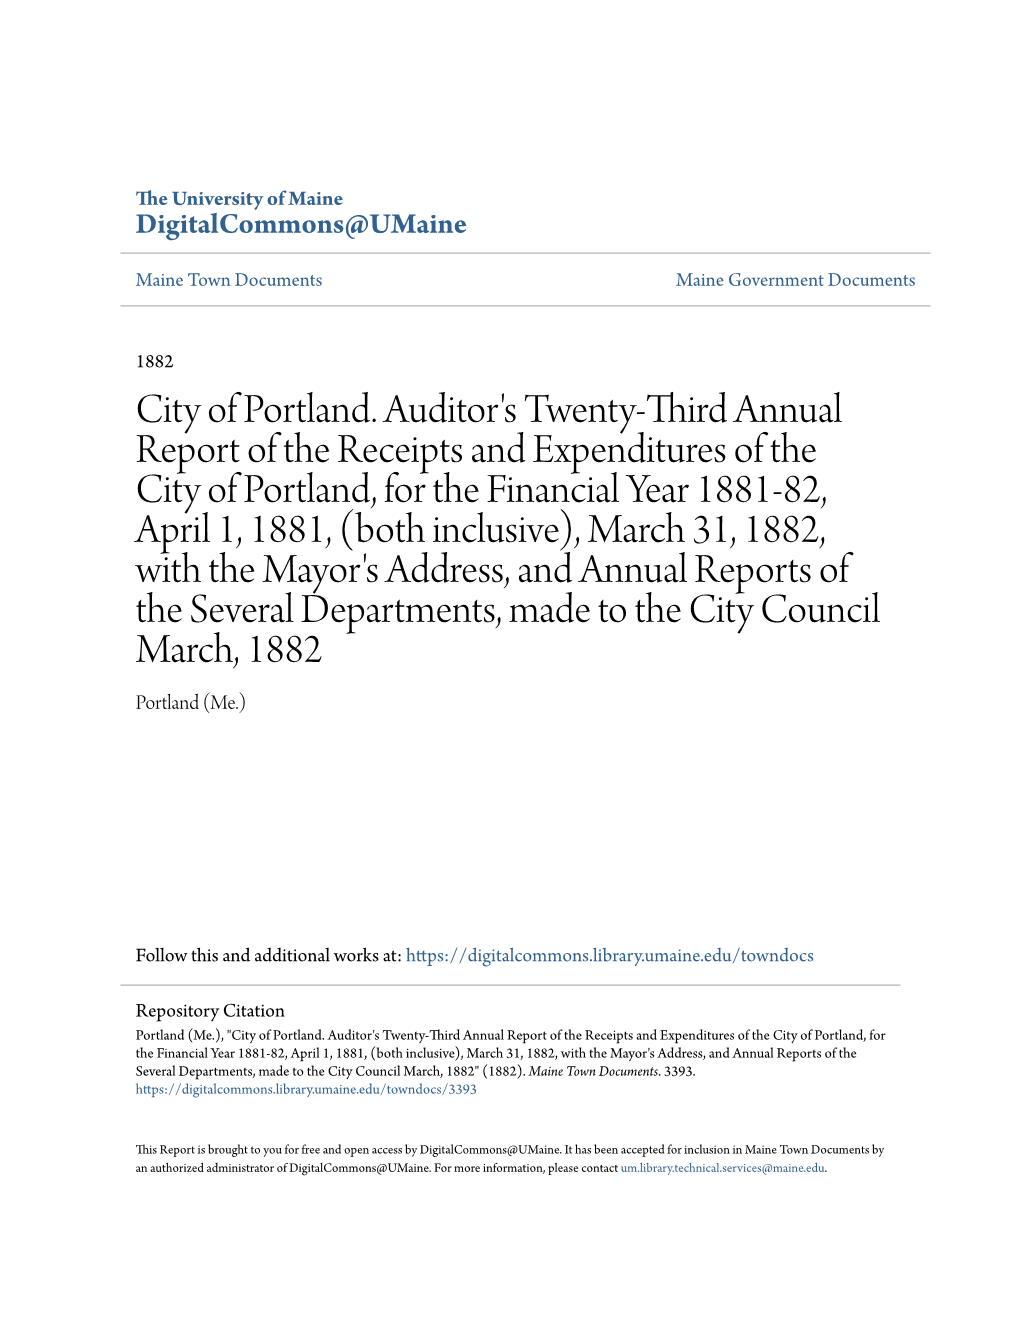 City of Portland. Auditor's Twenty-Third Annual Report of The